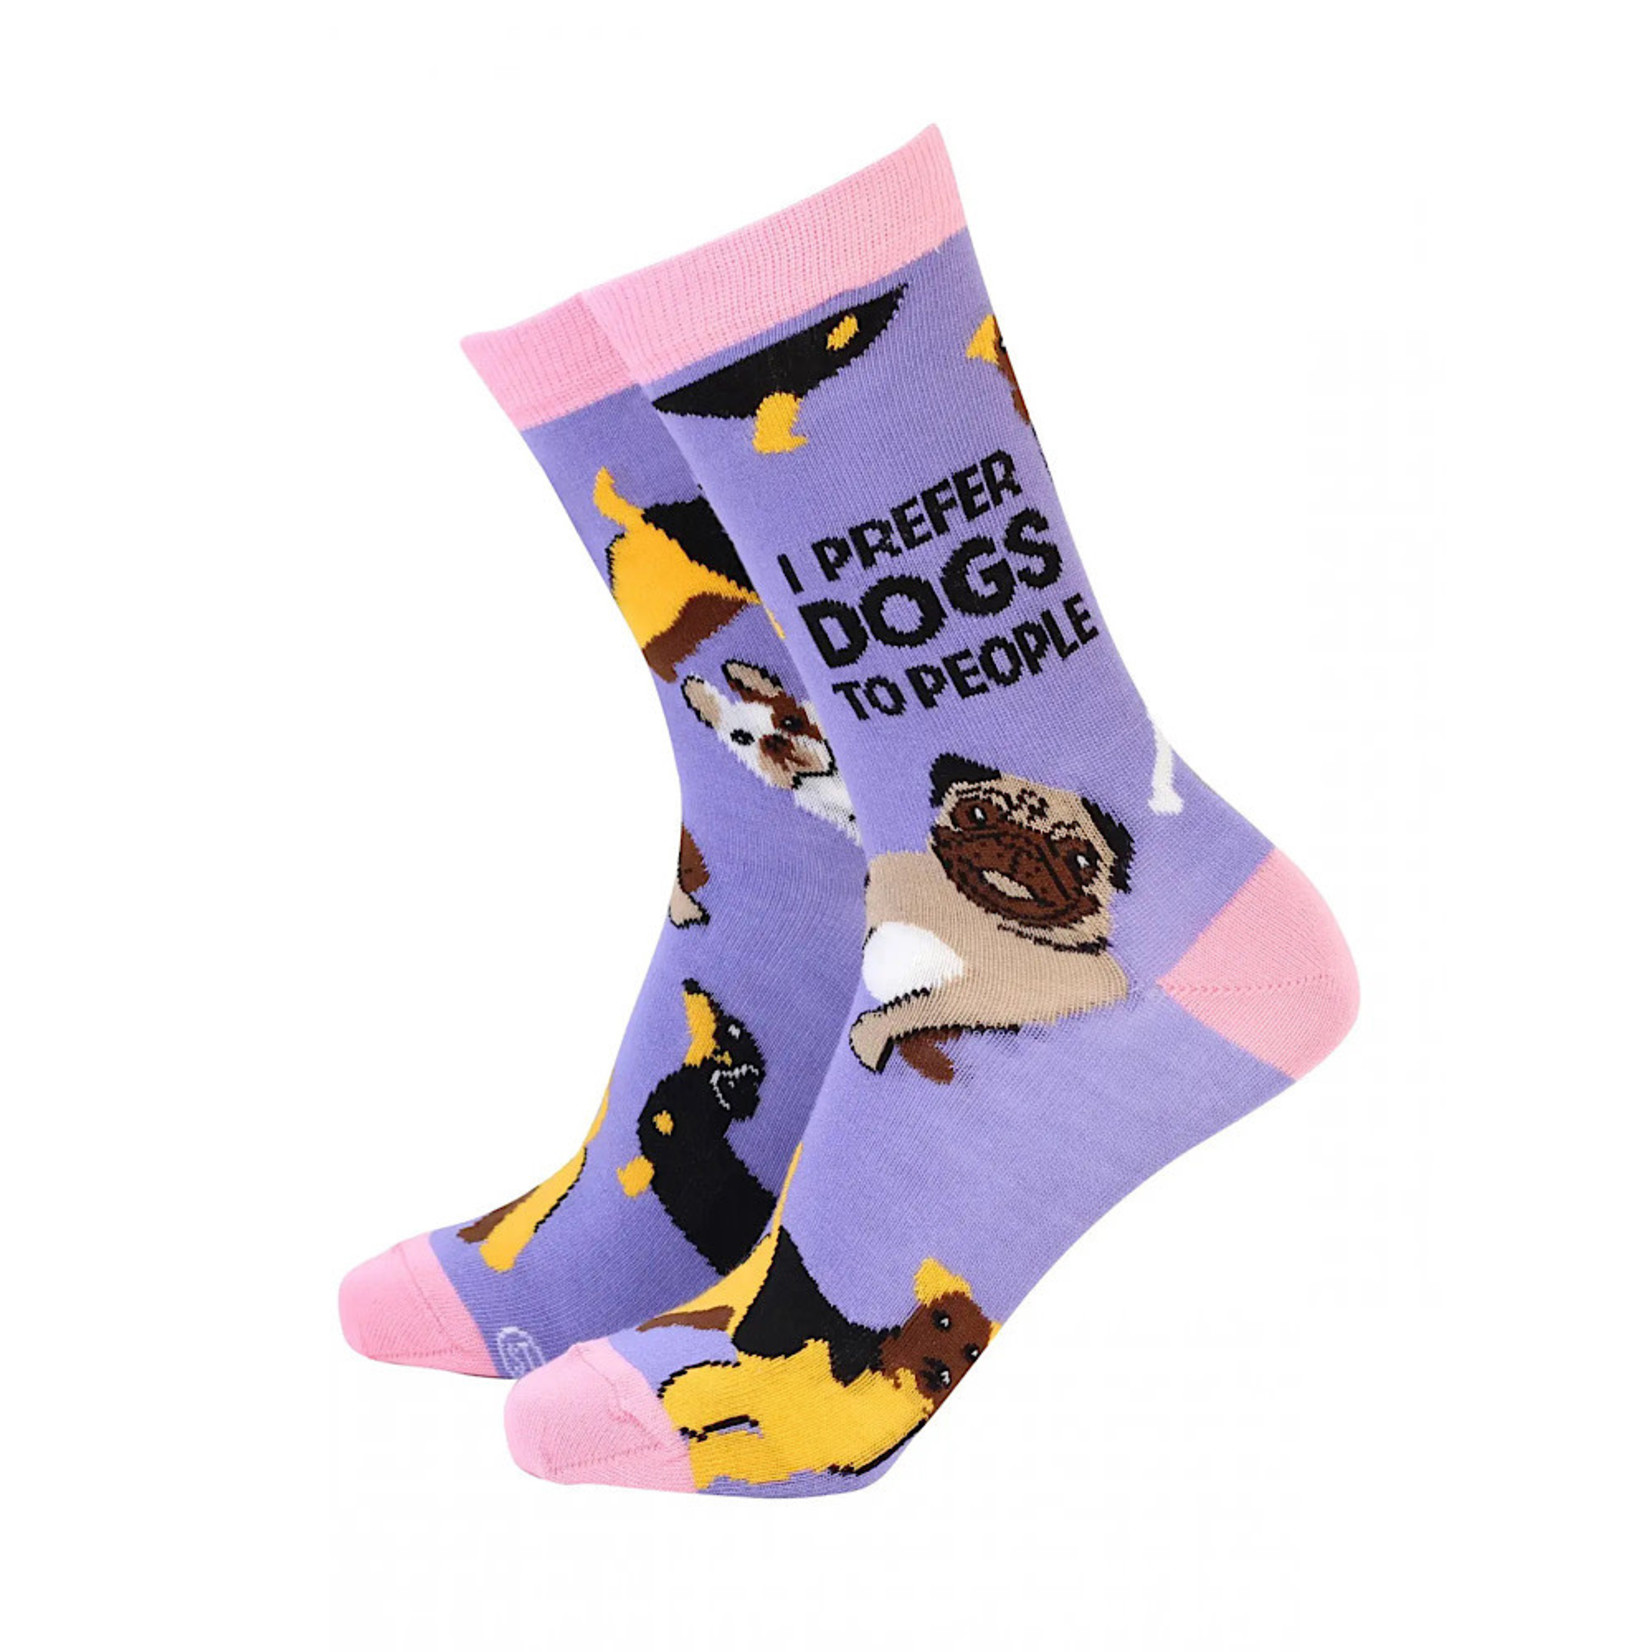 Socks (Womens) (Bamboo) - I Prefer Dogs To People